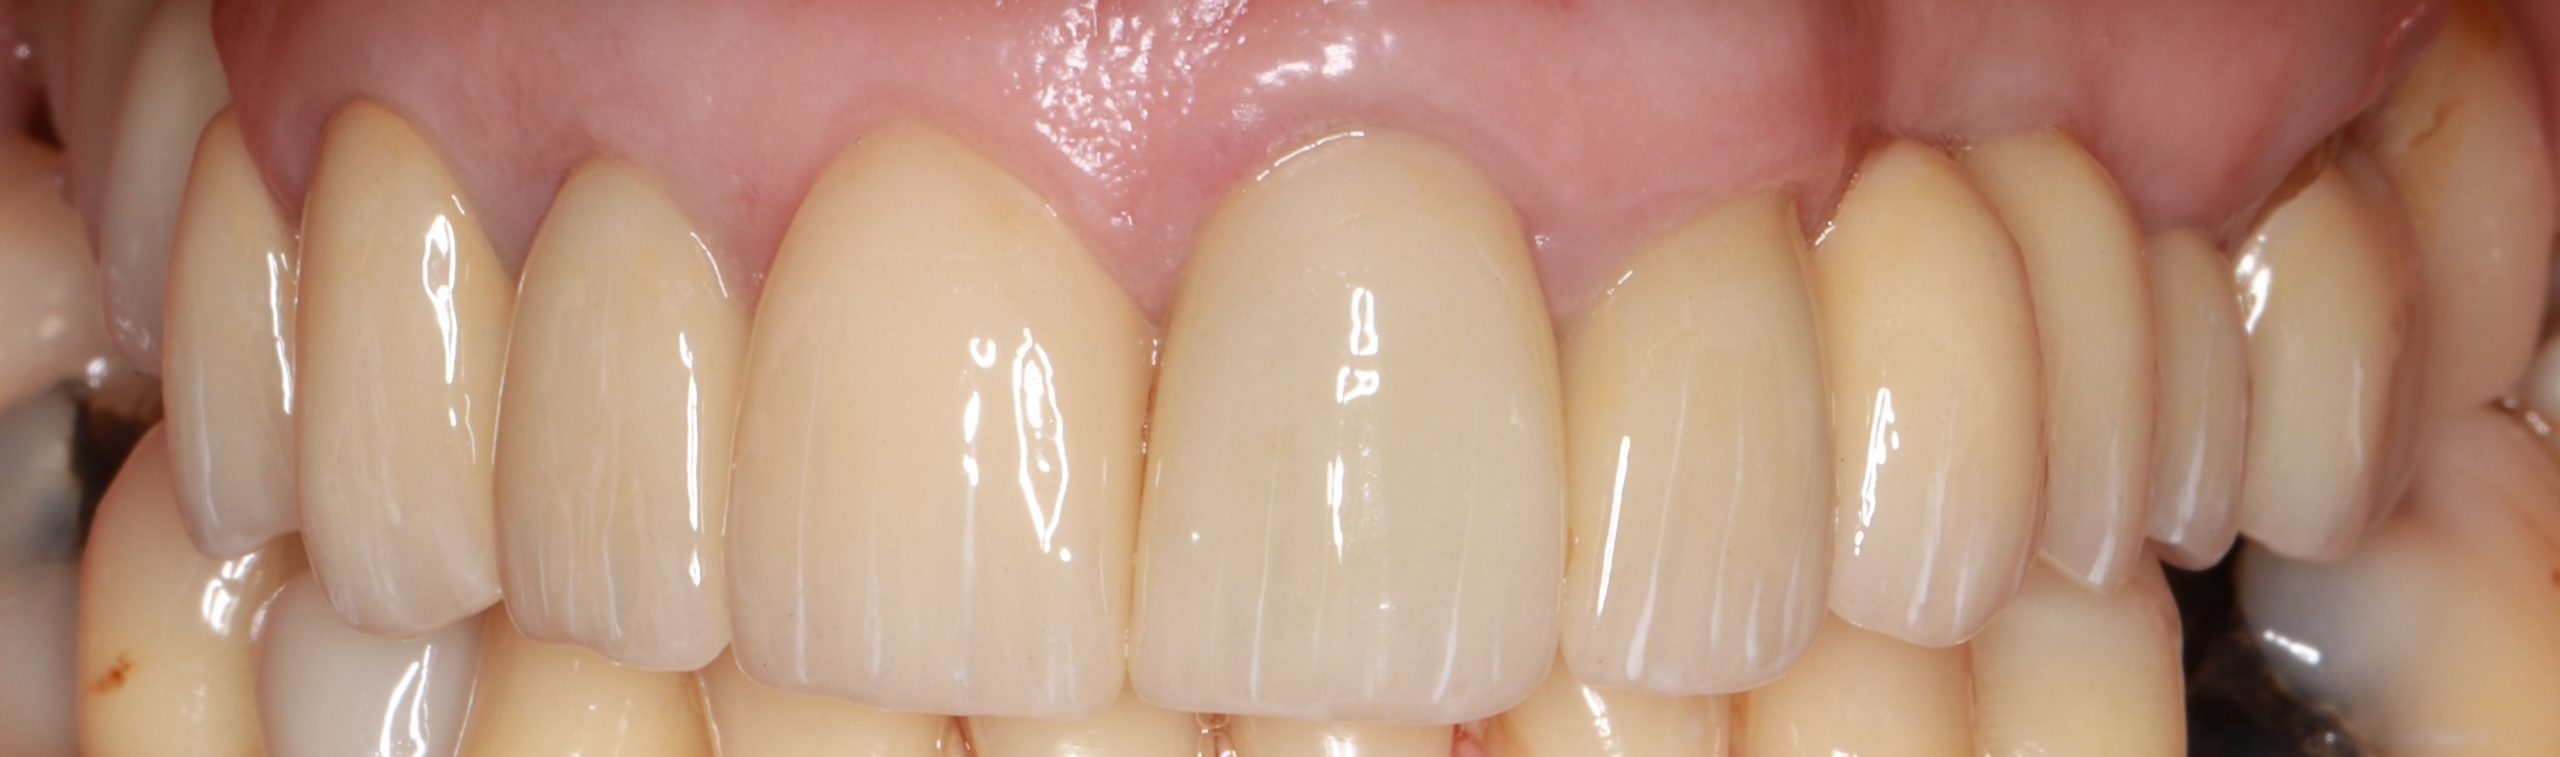 1.Full Mouth Rehabilitation with crowns, bridges and implants After